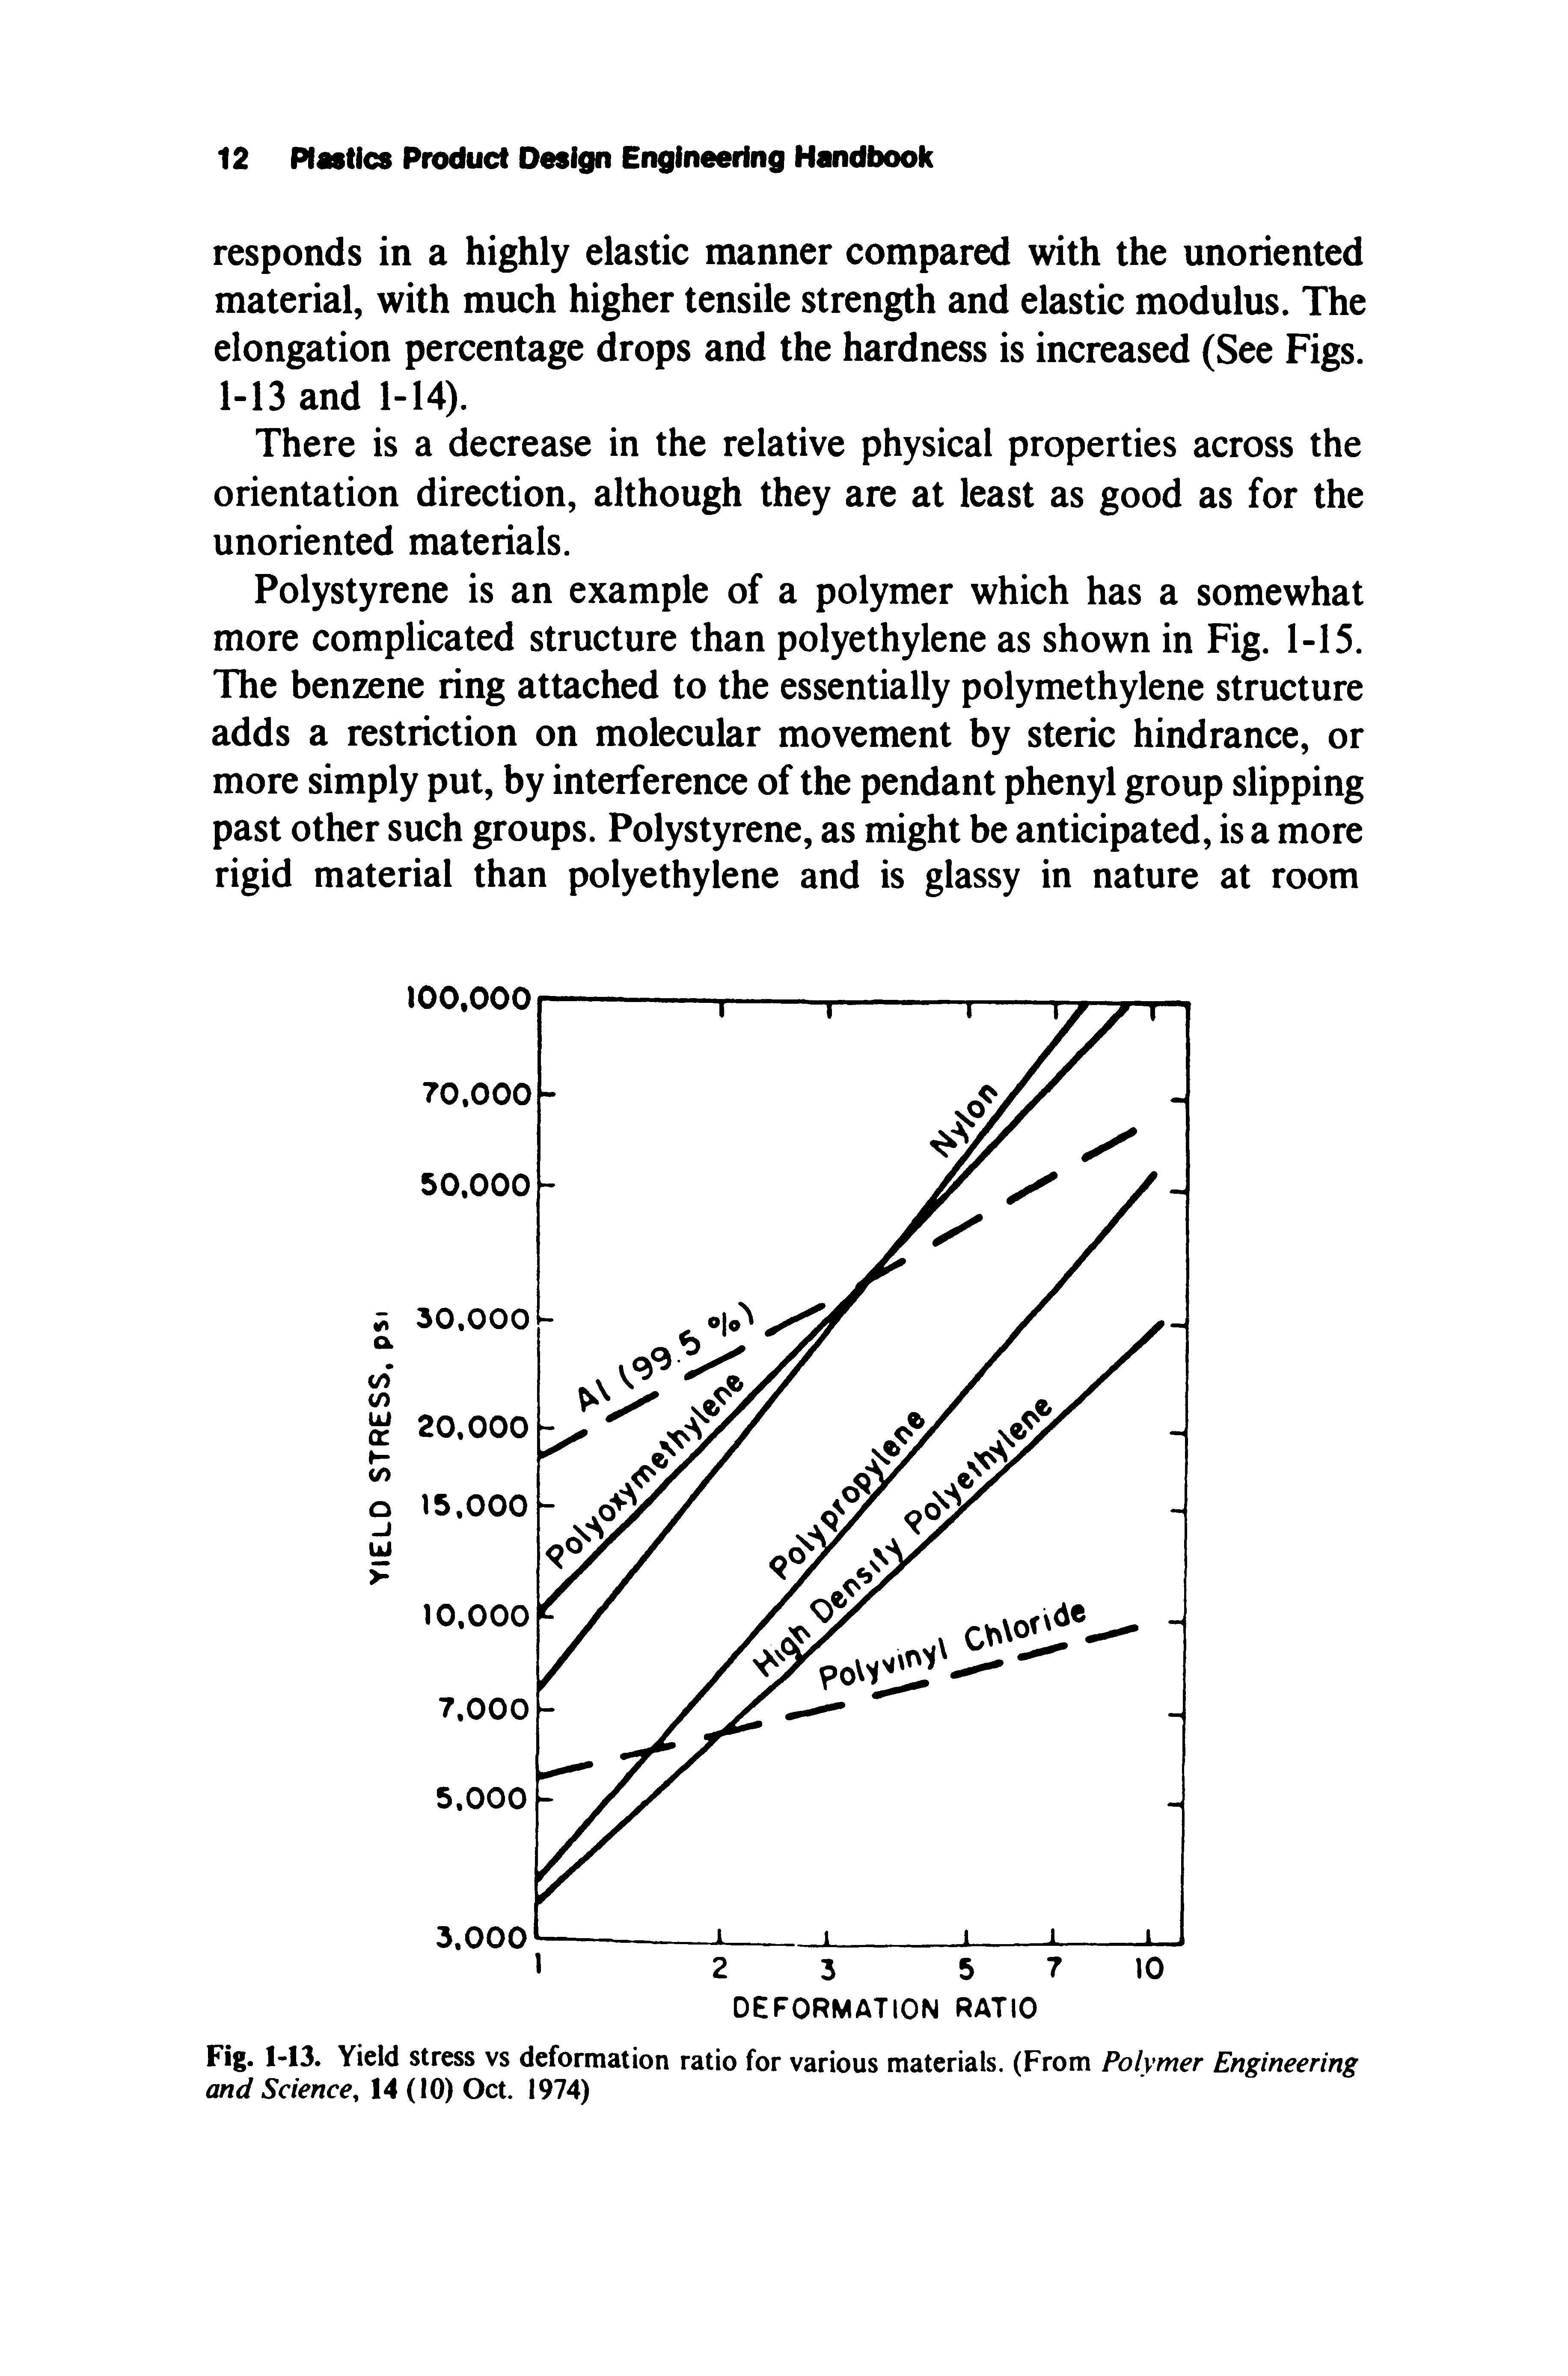 Fig. 1-13. Yield stress vs deformation ratio for various materials. (From Polymer Engineering and Science, 14 (10) Oct. 1974)...